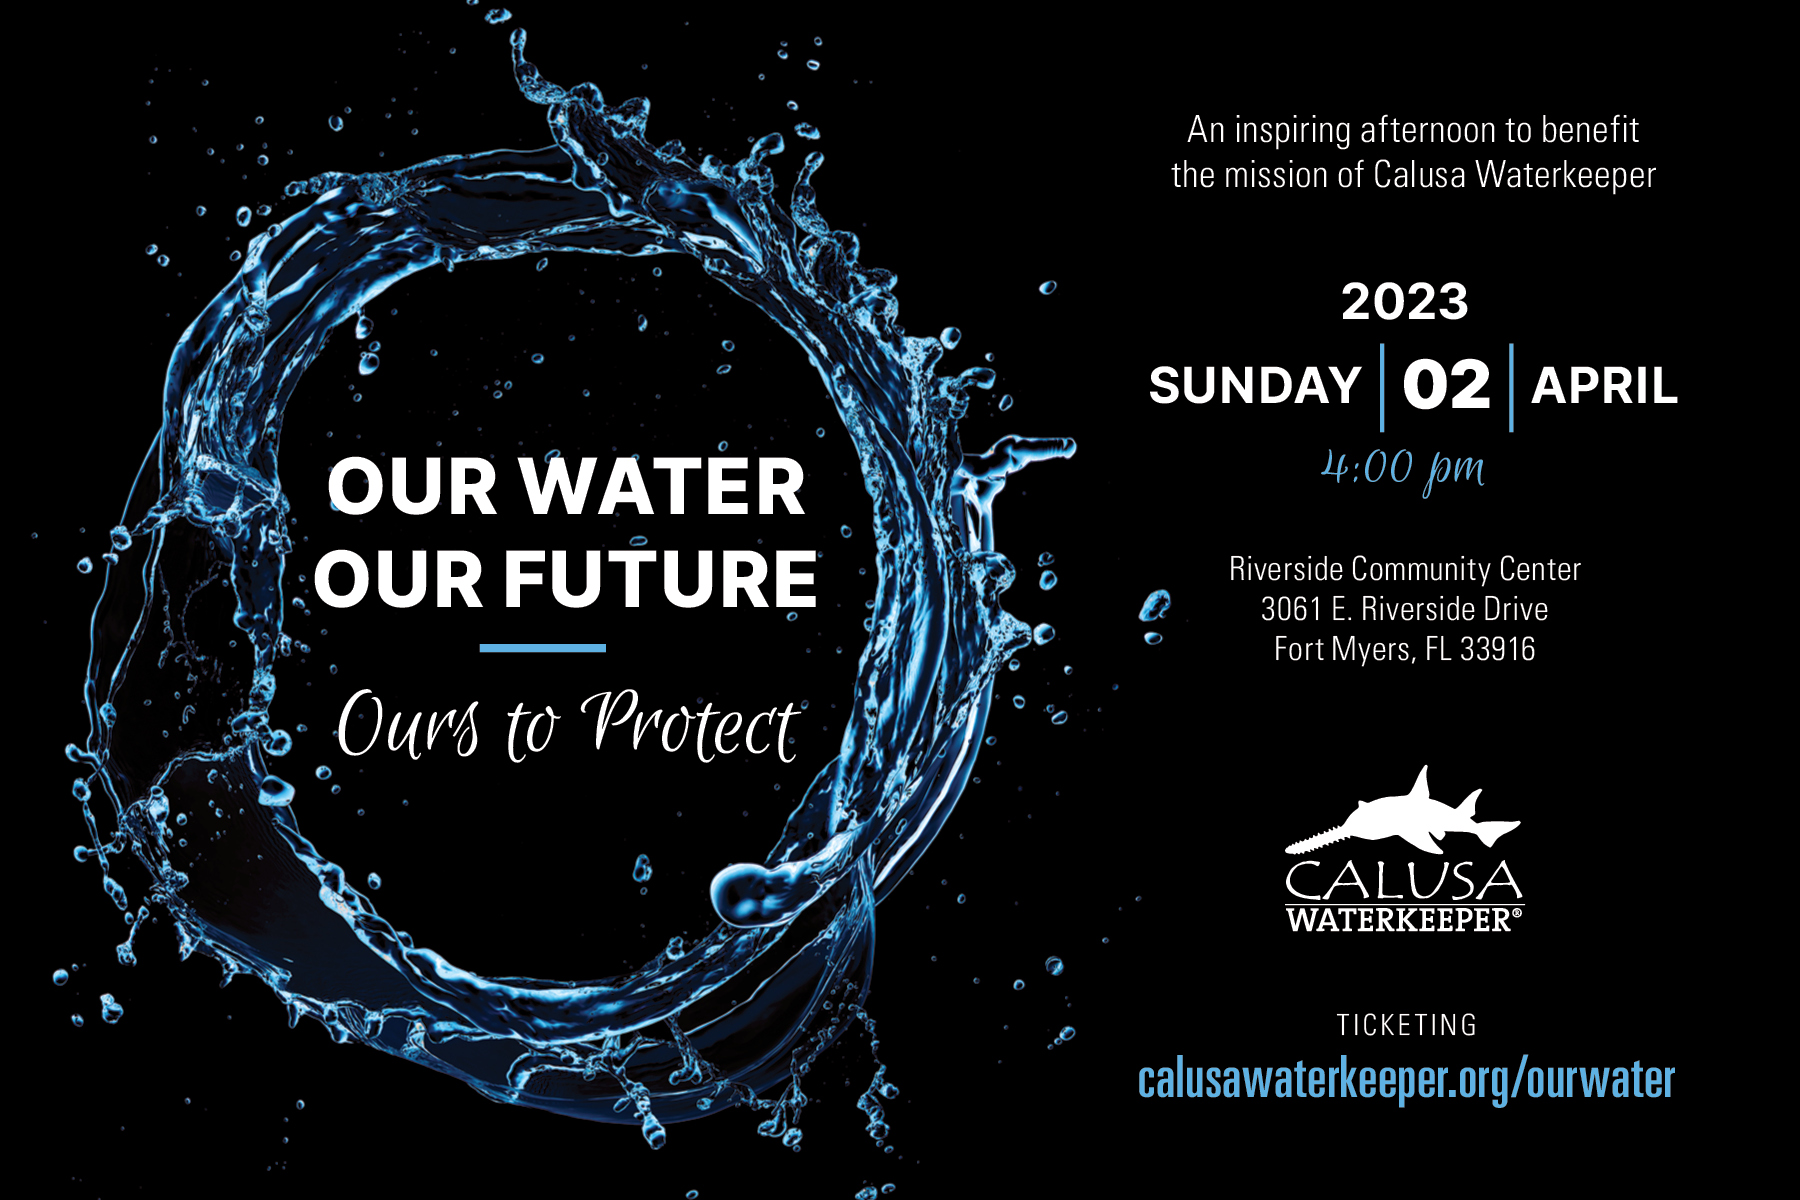 Our Water, Our Future. Ours to Protect.